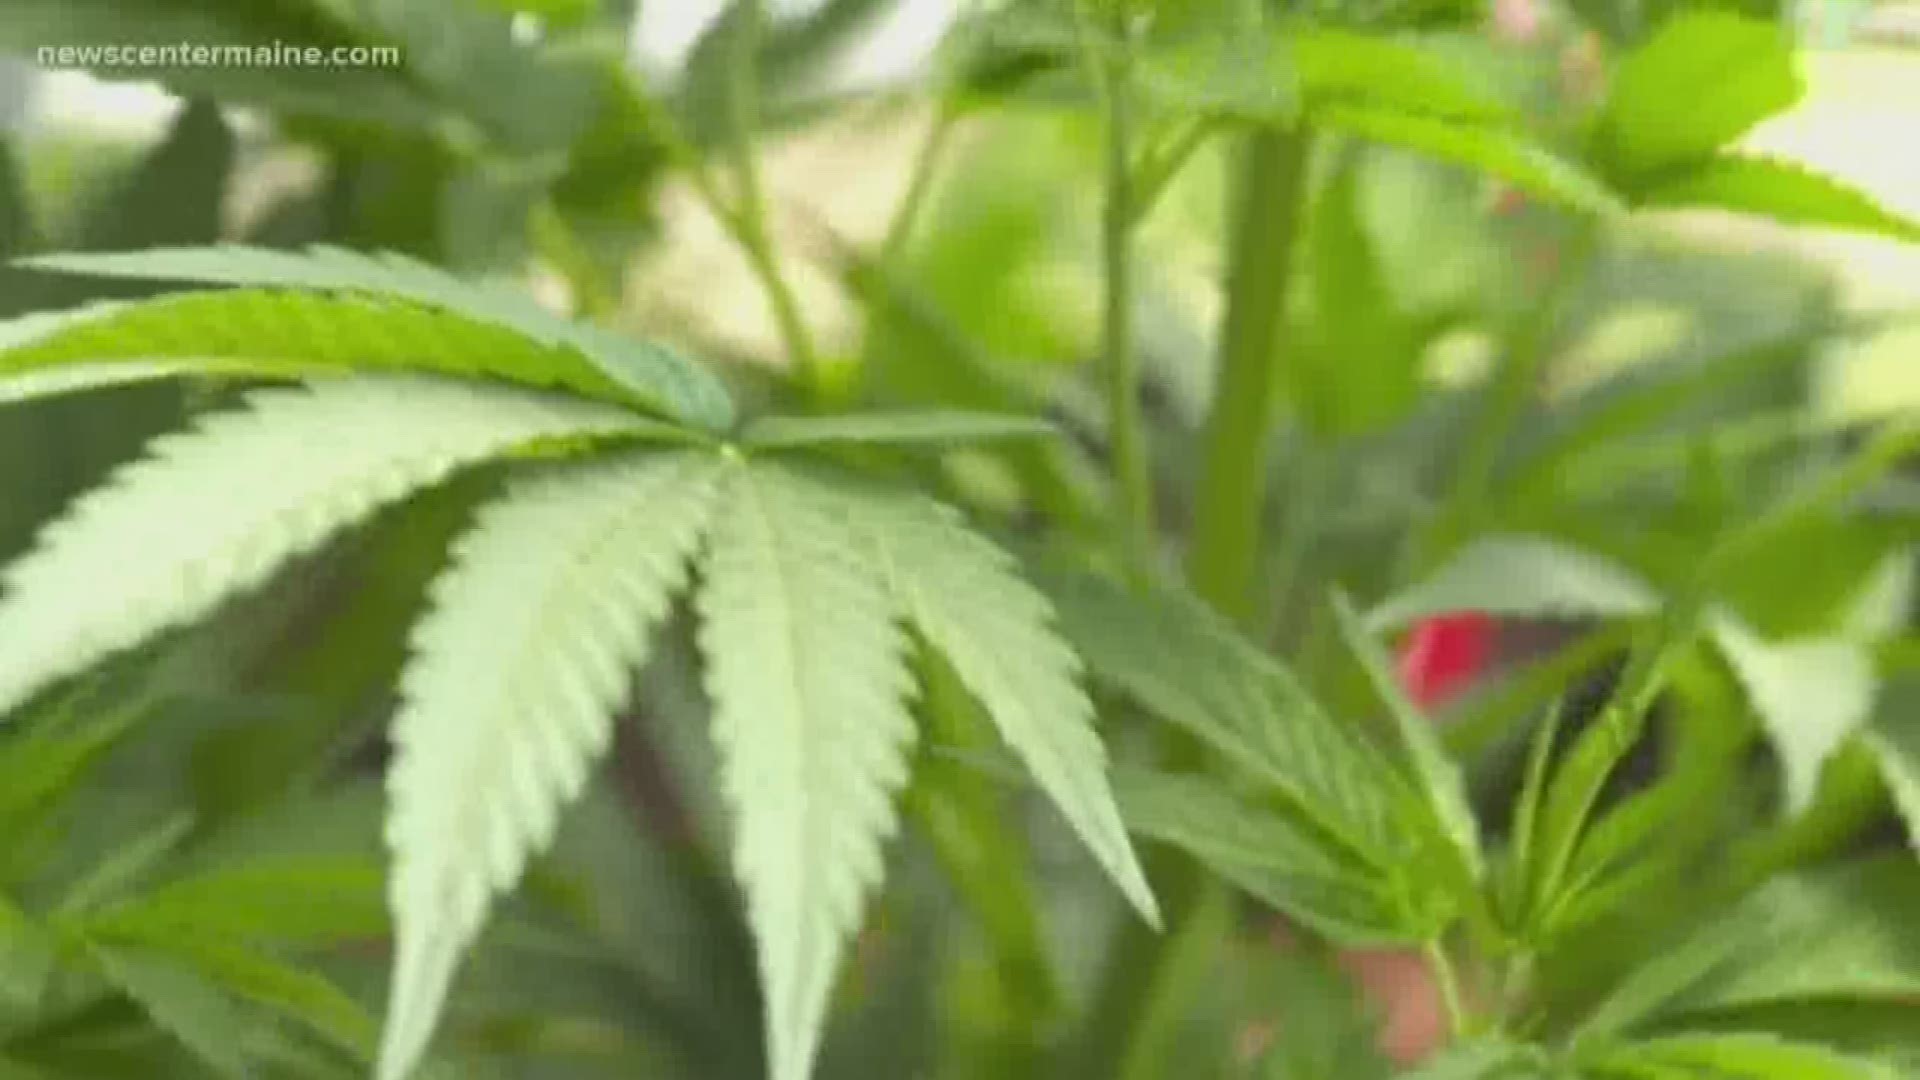 A proposal on retail marijuana sales regulations is on its way to the full Portland City Council.